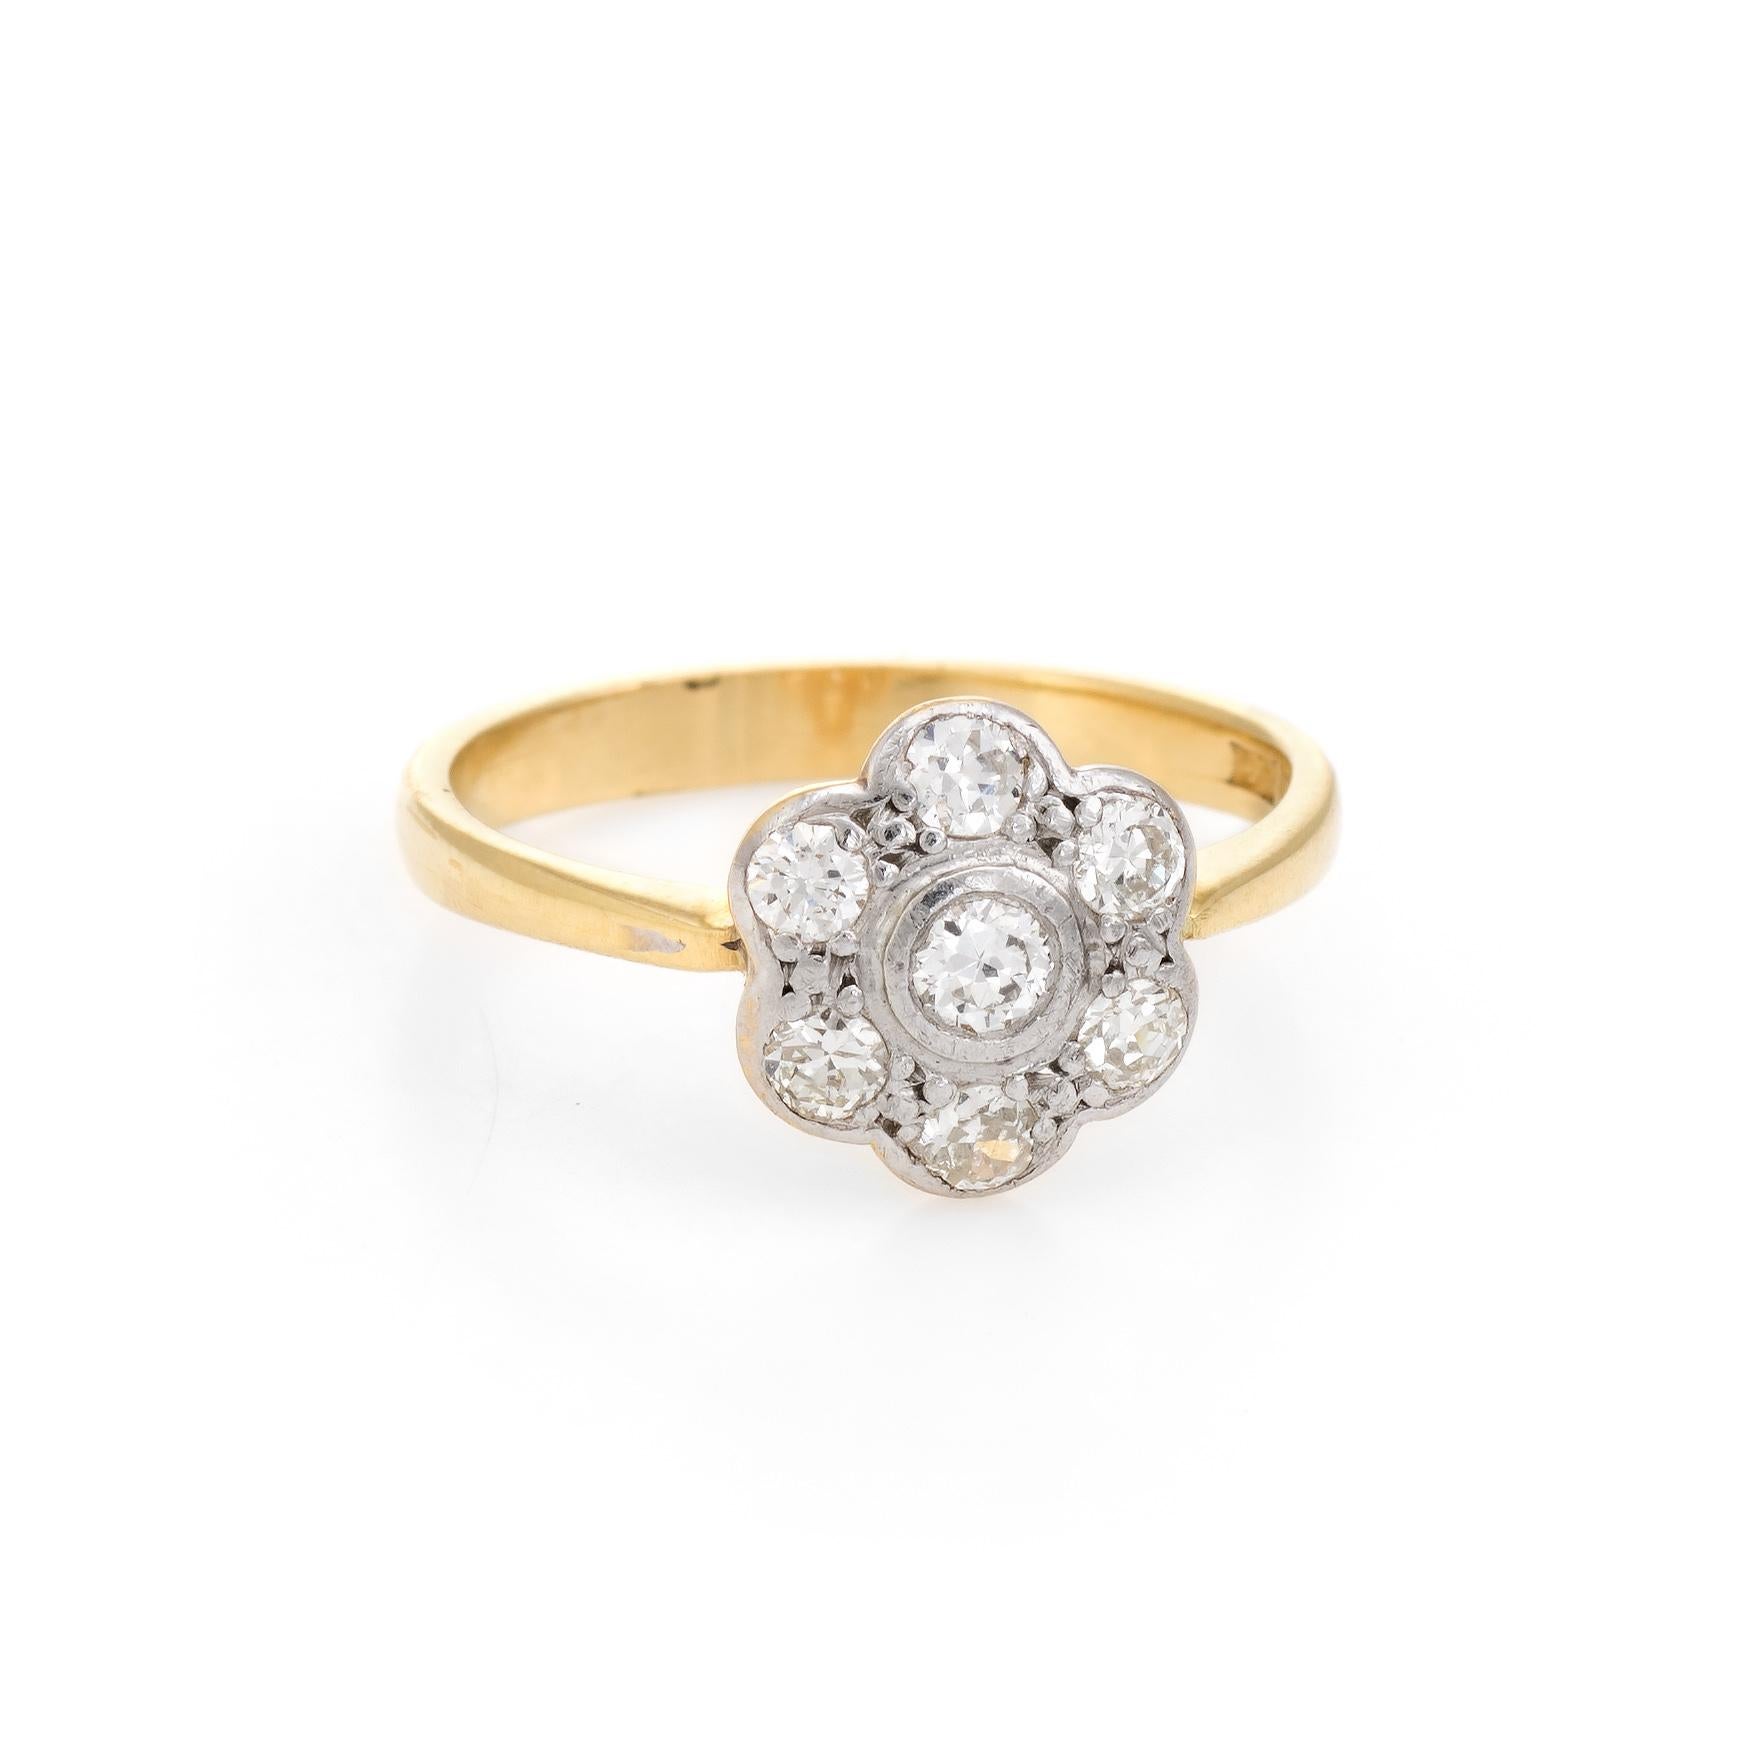 Finely detailed antique Victorian forget-me-not ring set with old mine cut diamonds (circa 1880s to 1900s), crafted in 18 karat yellow gold and 900 platinum. 

The old mine cut diamonds graduate in size from the center (estimated at 0.10 carats) to